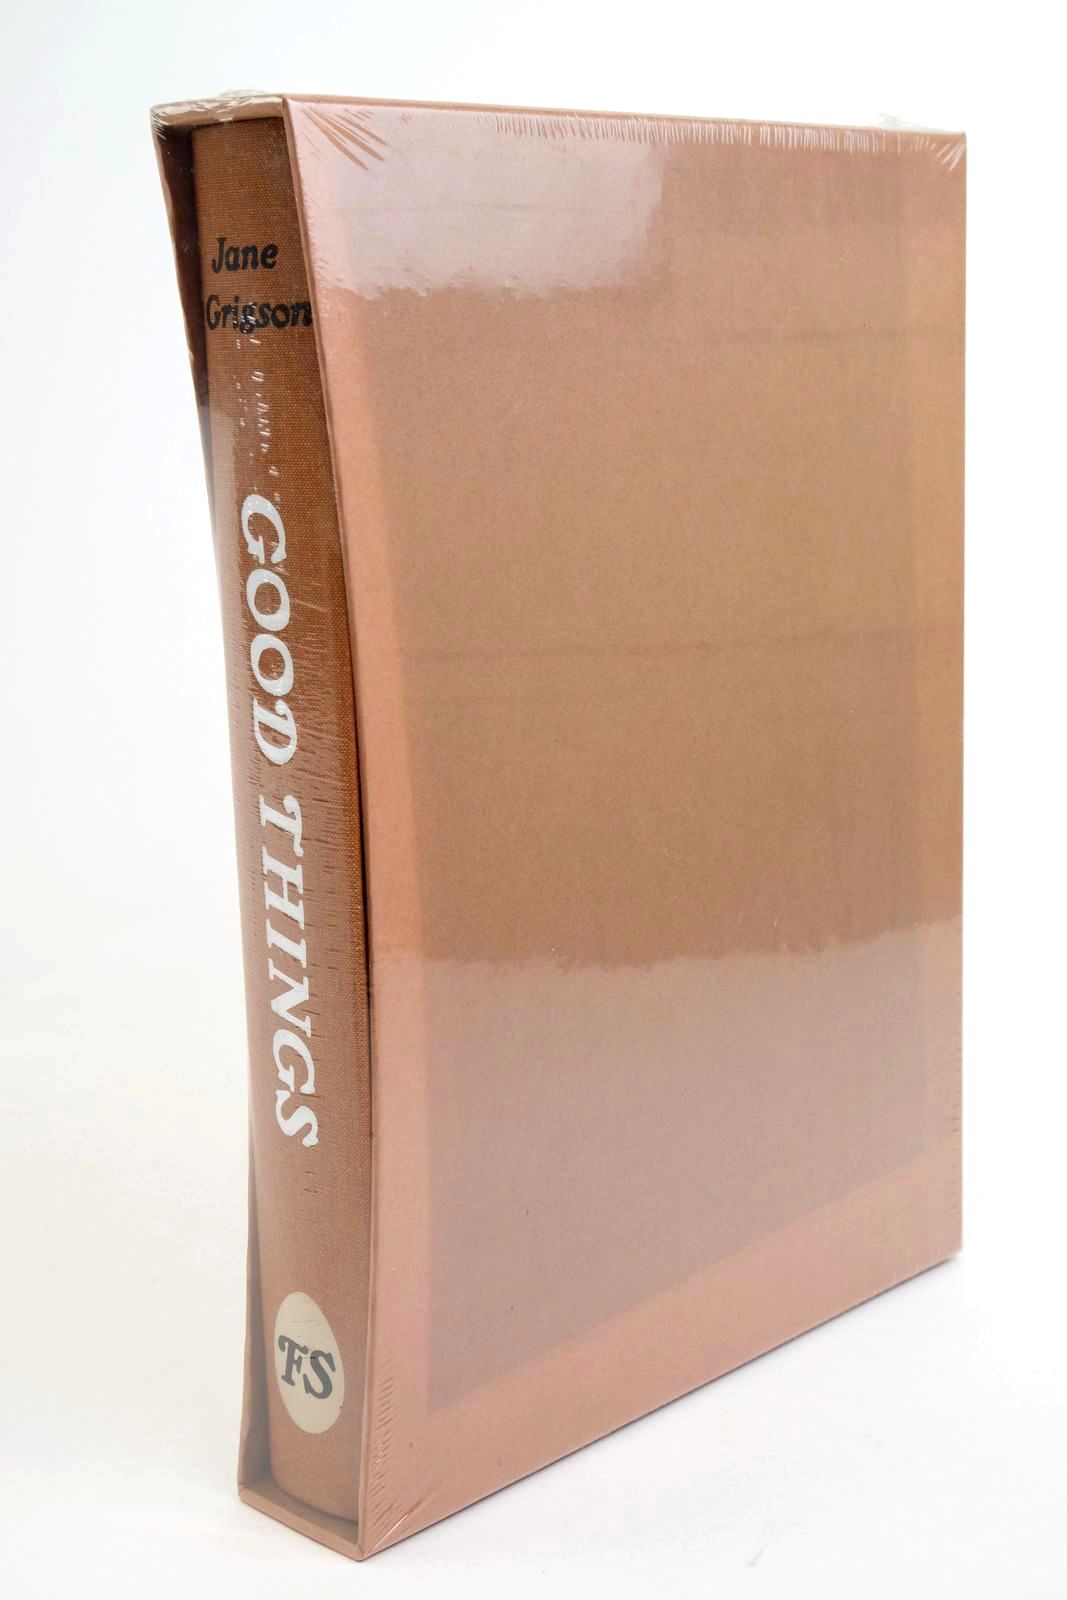 Photo of GOOD THINGS written by Grigson, Jane illustrated by Tait, Alice published by Folio Society (STOCK CODE: 1322224)  for sale by Stella & Rose's Books